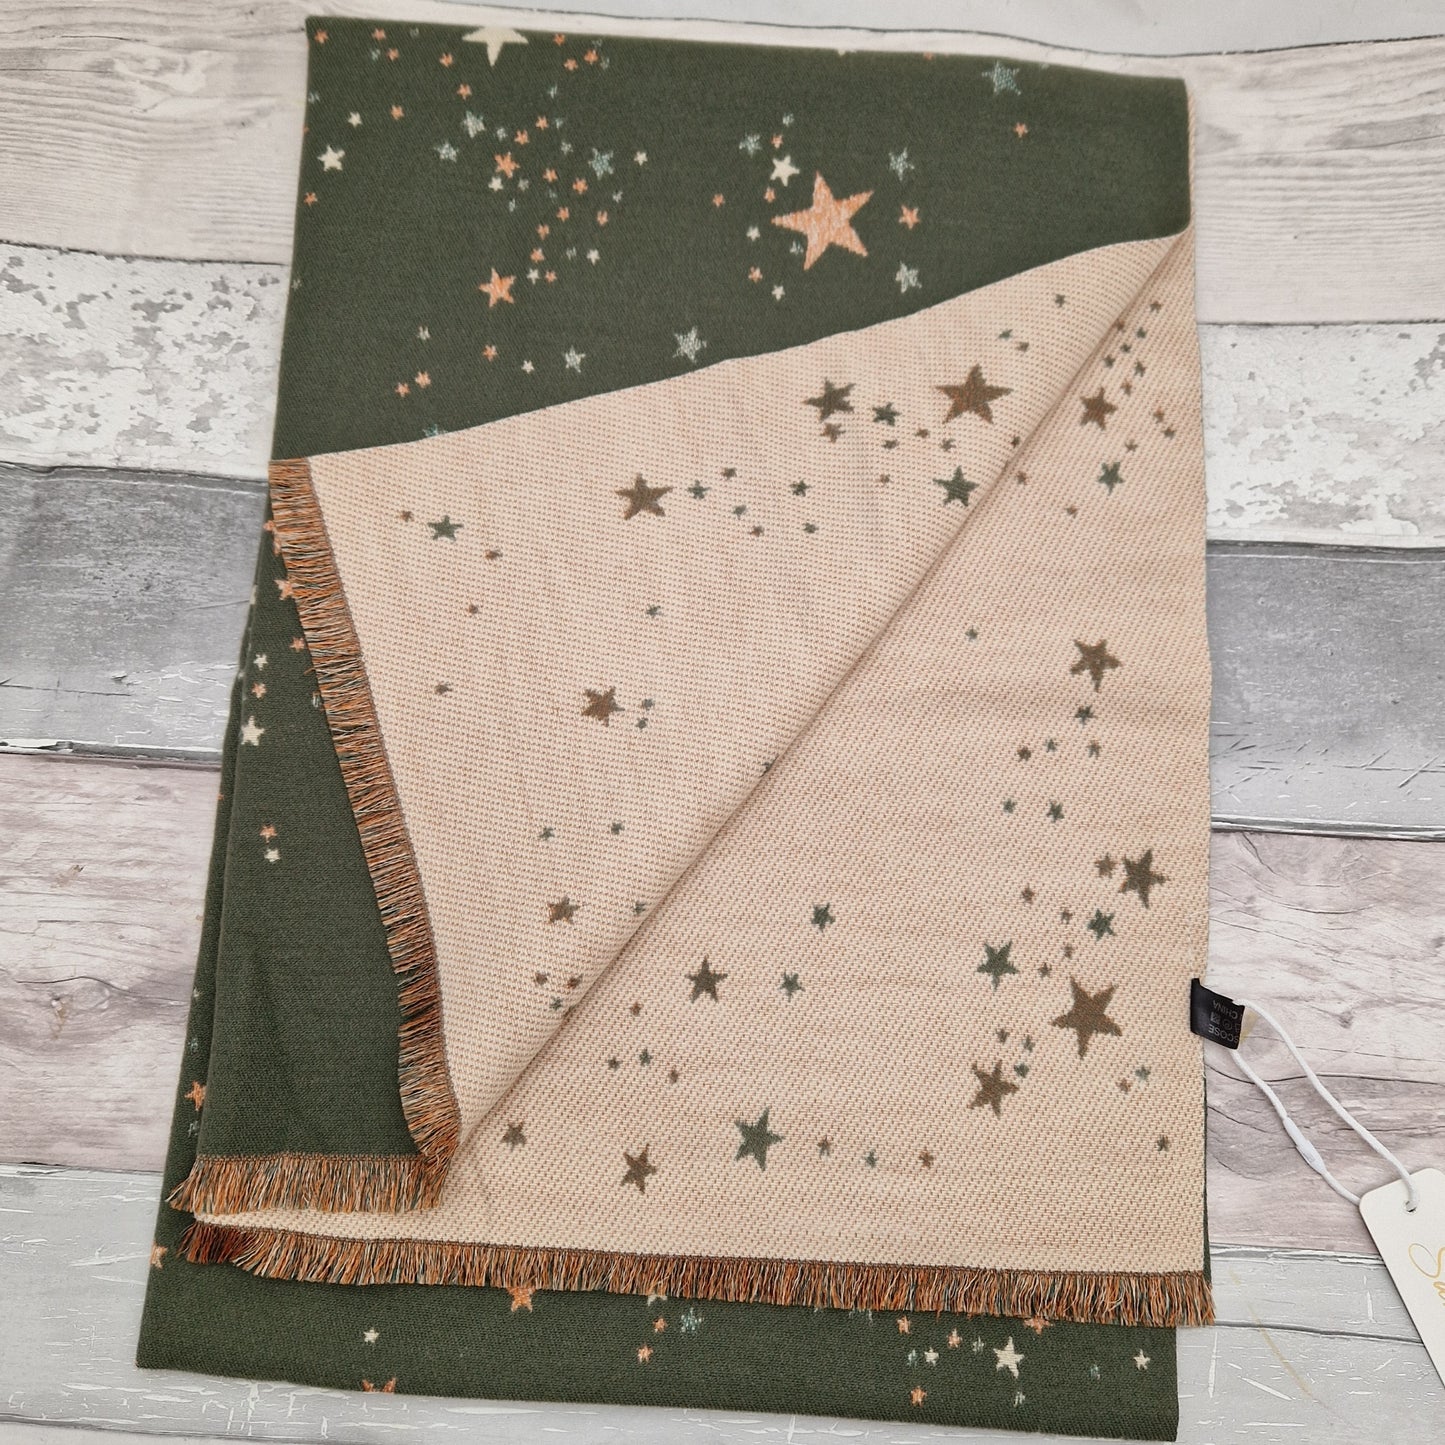 Khaki Coloured Scarf decorated with Celestial Stars